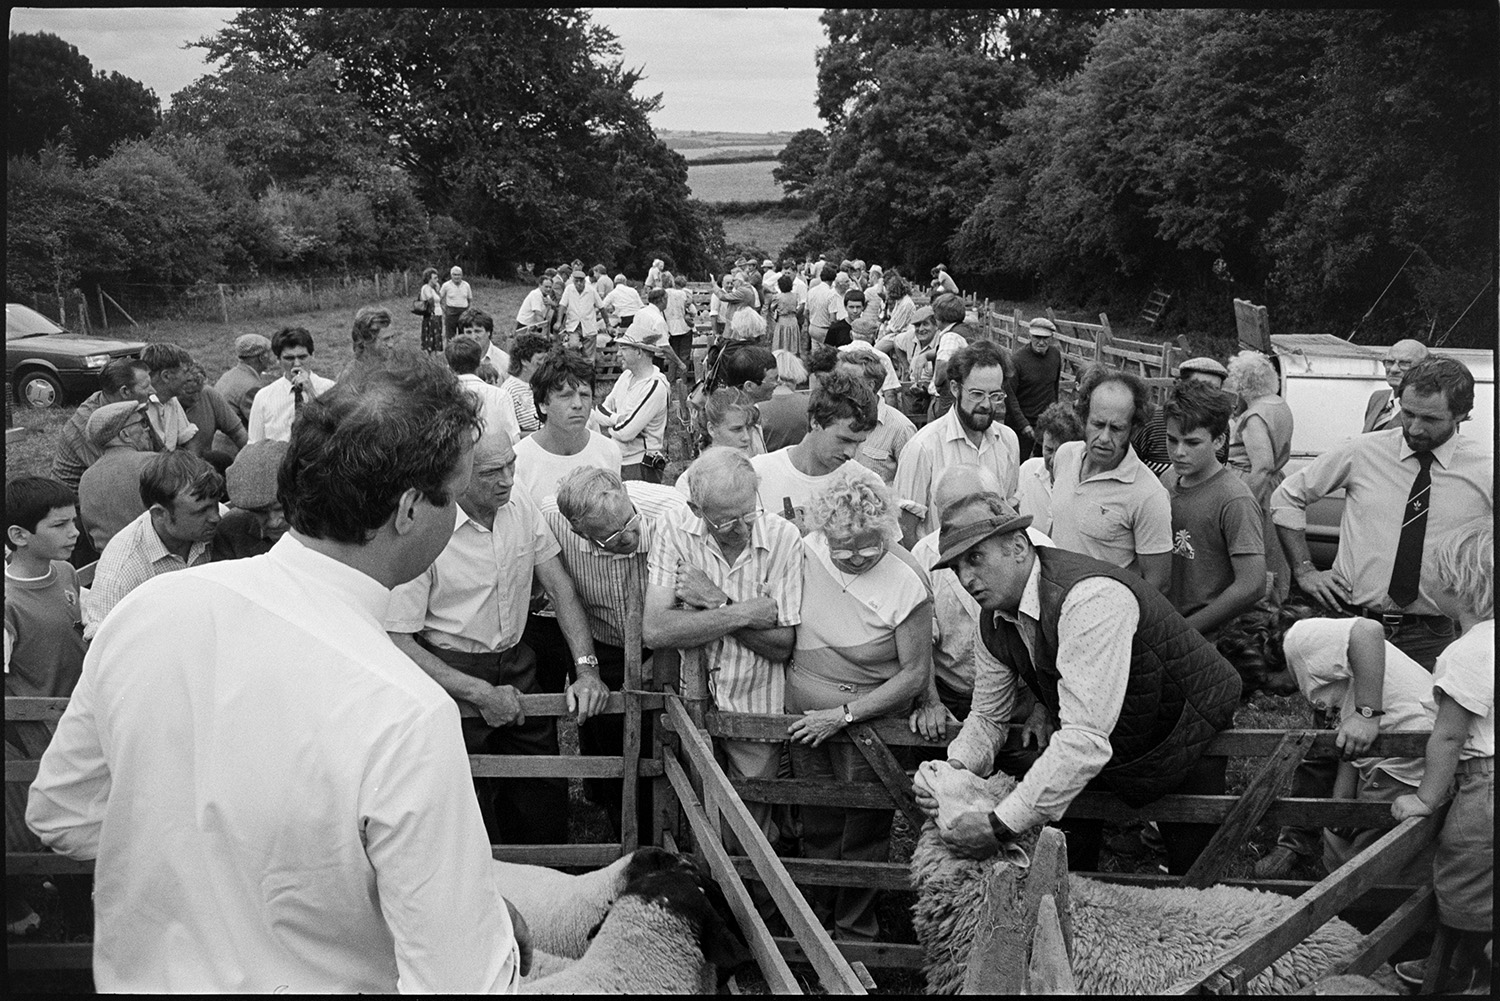 Fair, auction of sheep, farmers and crowds of spectators.
[A crowd of men and women watching the sale of sheep at Chulmleigh Fair, with a man inspecting one of the sheep in a wooden pen in the foreground.]